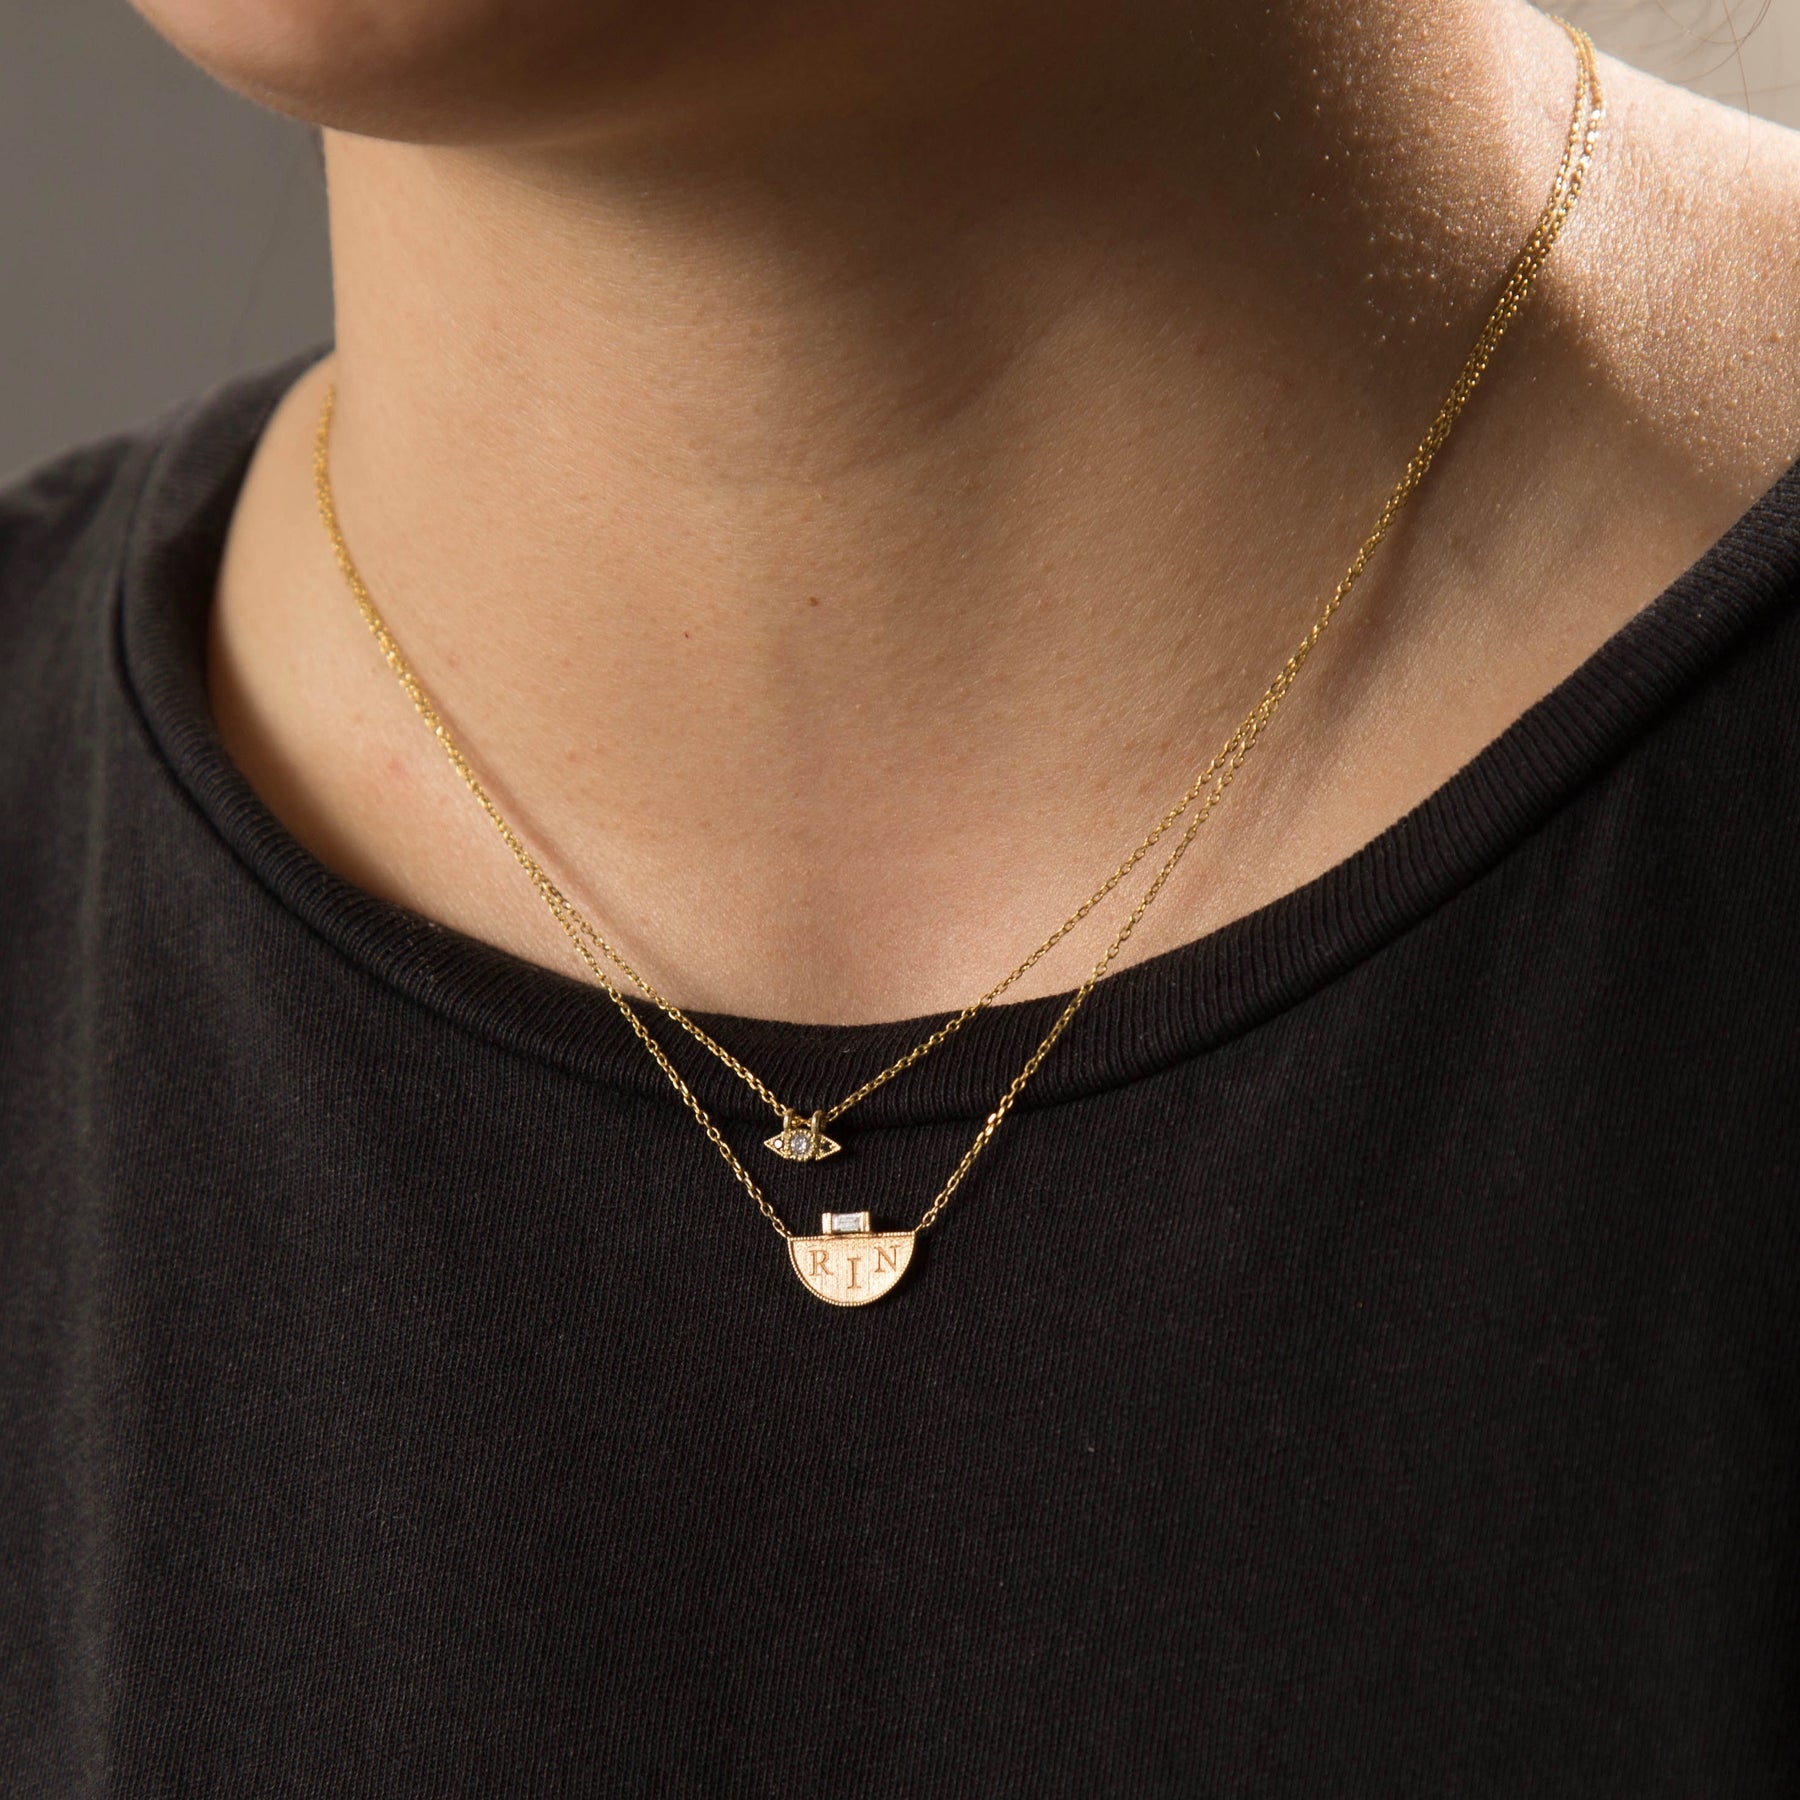 Spear Pendant Necklace, Gold Layering Necklaces for Women